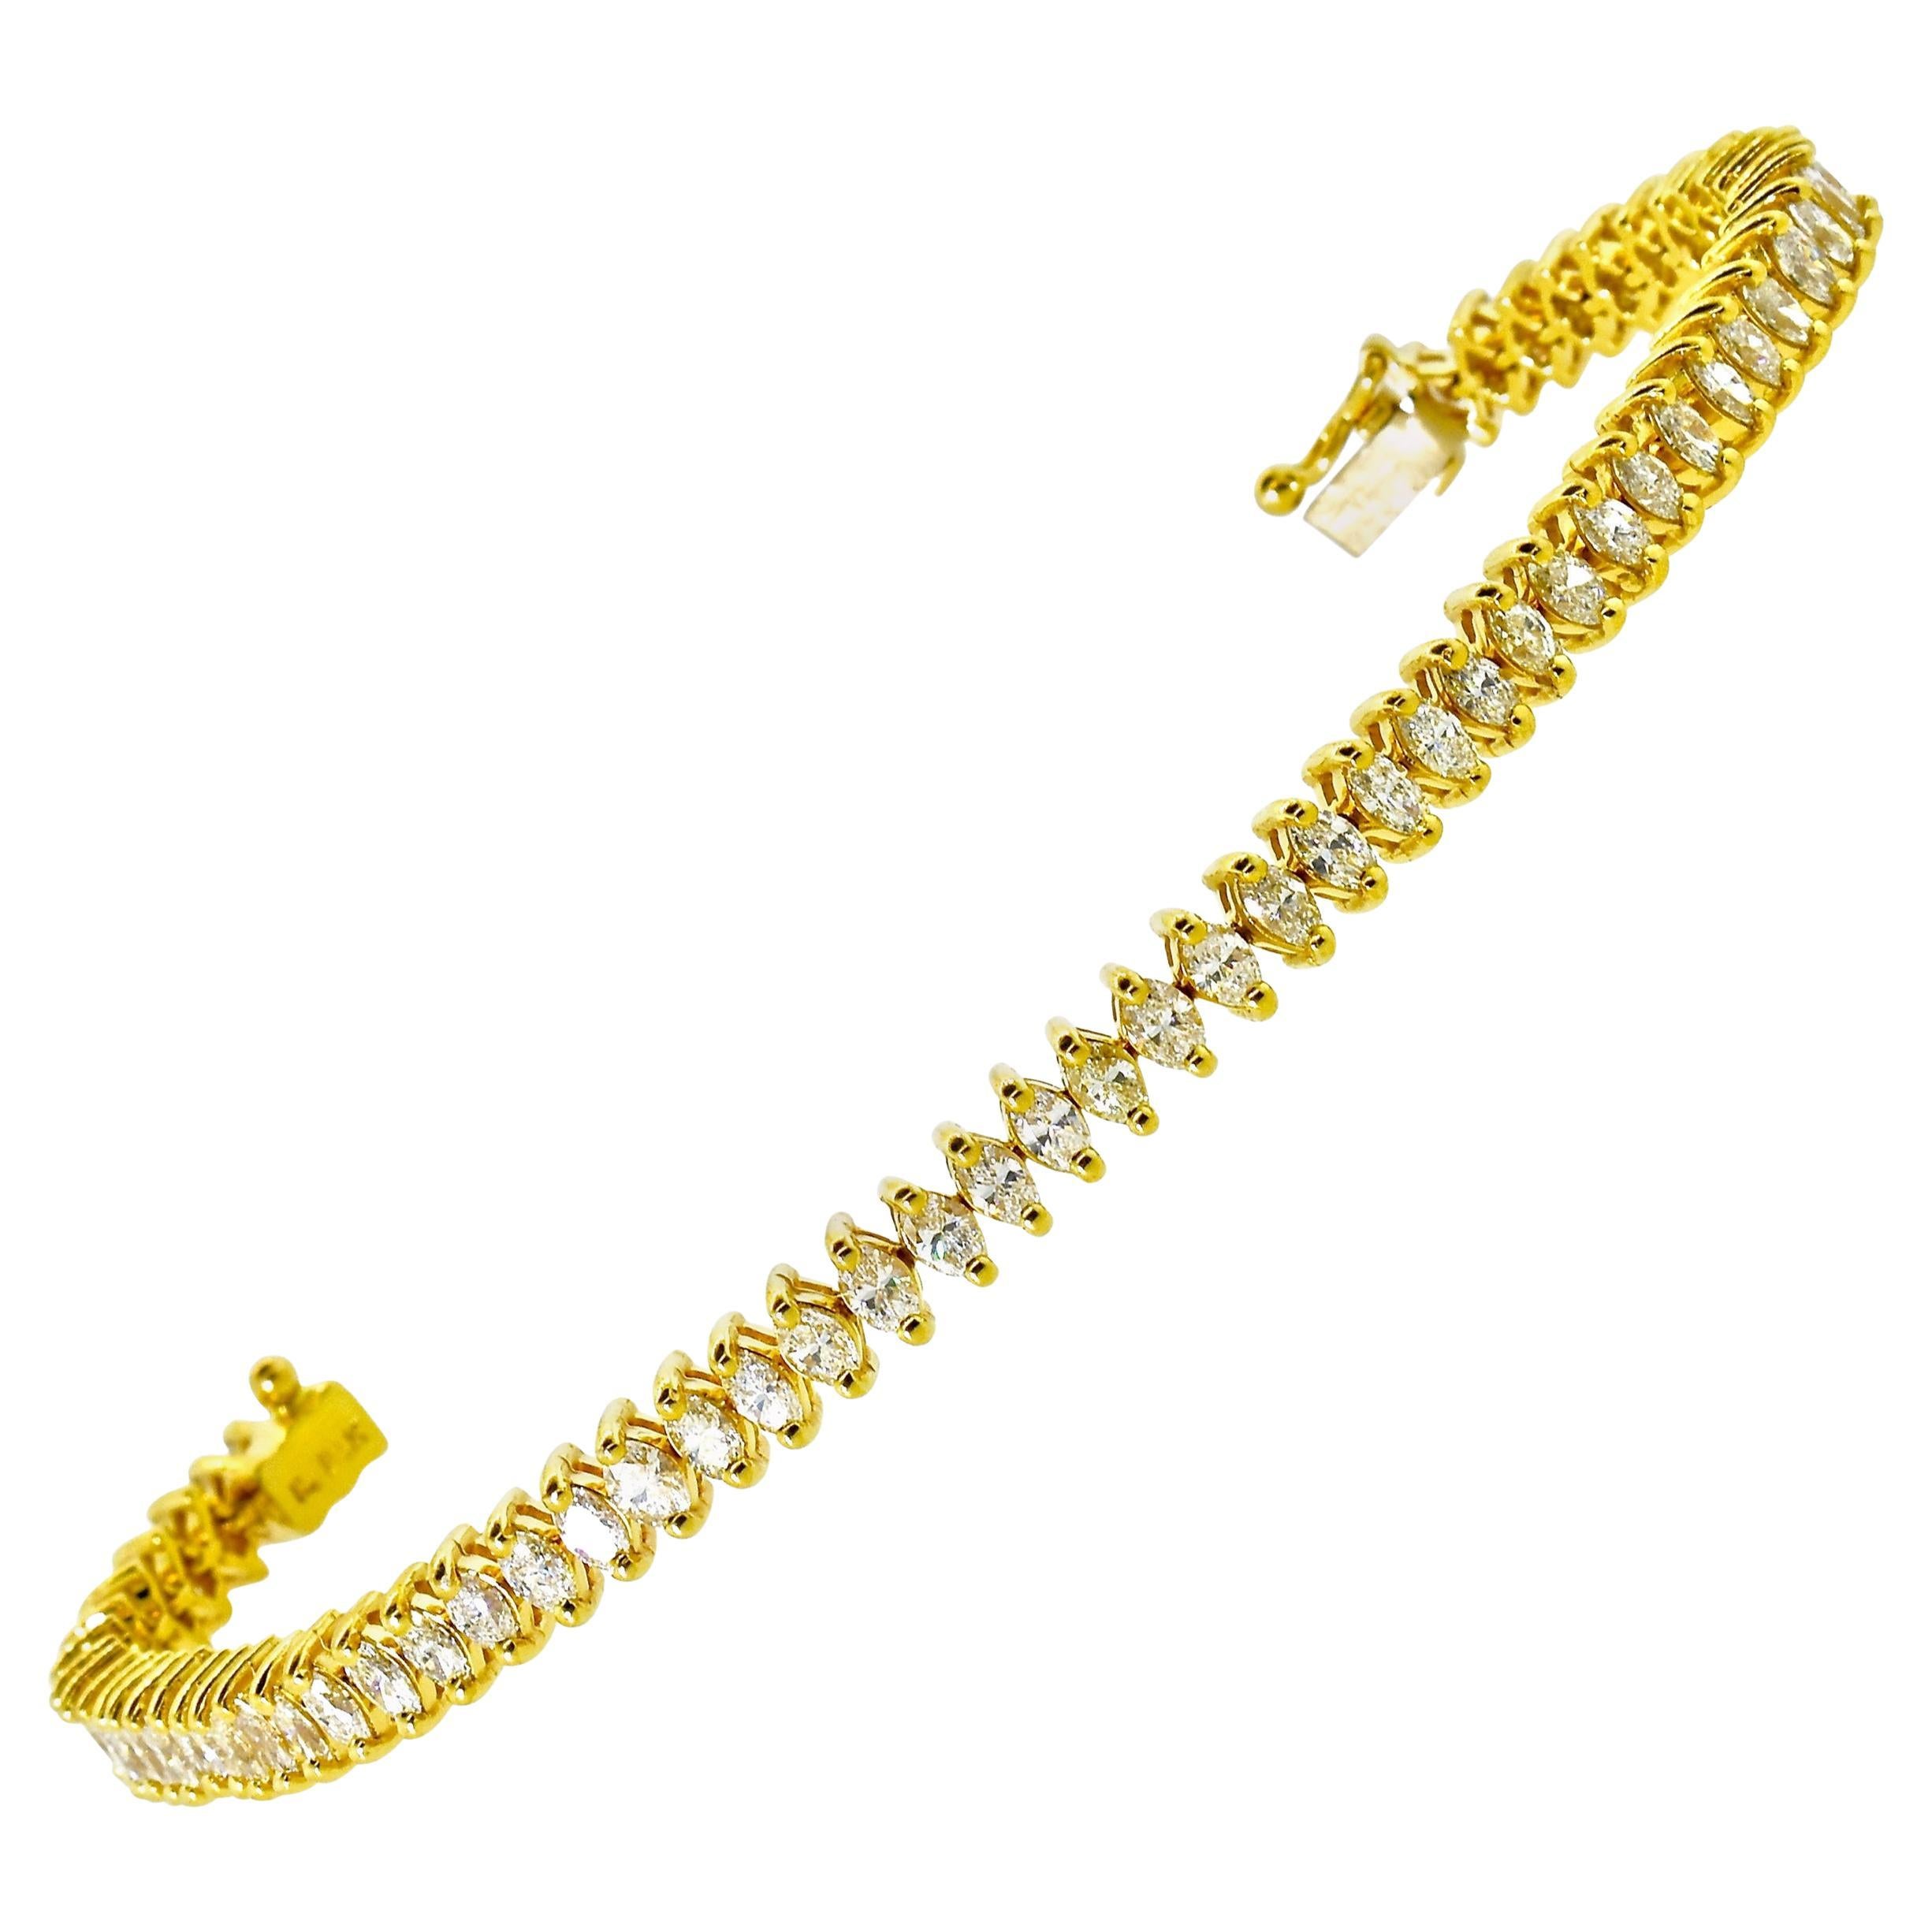 Diamond and gold well made contemporary bracelet possessing 63  well cut and finely match marquis diamonds.  These diamonds are estimated all to be near colorless (H), and very slightly included (VS).  The total weight is 3.75 cts. This highly